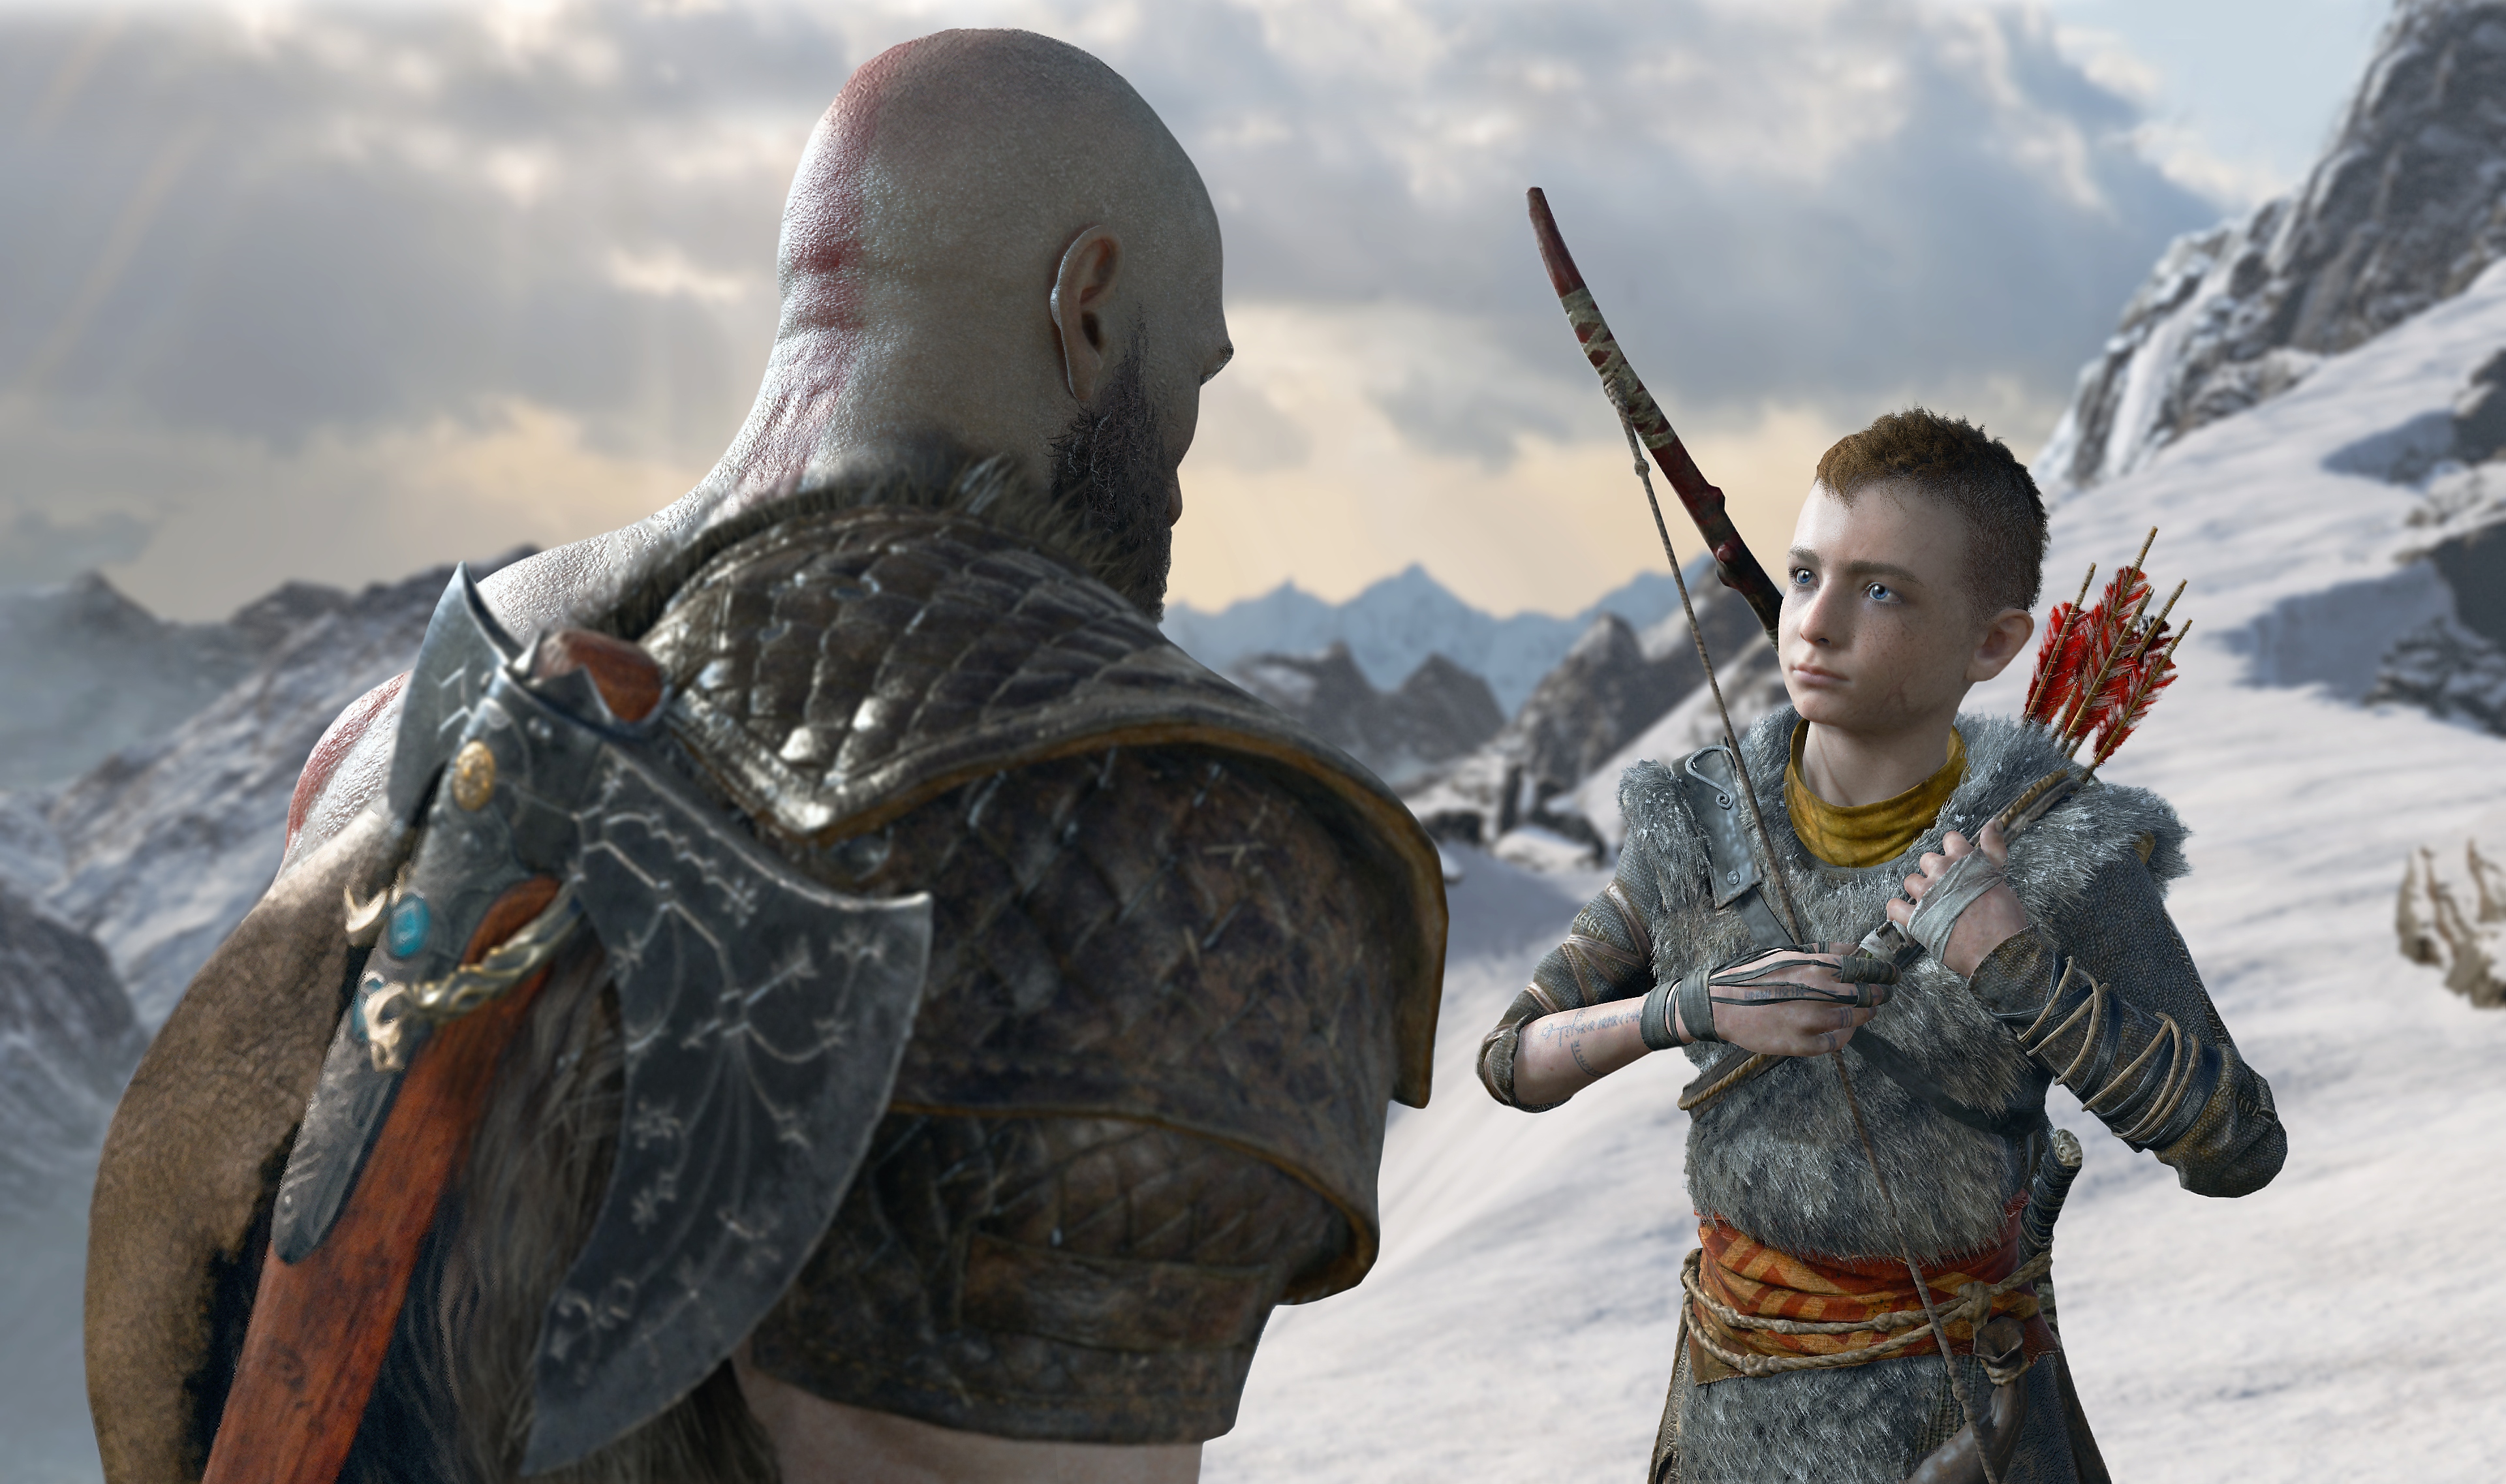 ashleigh mccurry add pictures of the god of war photo